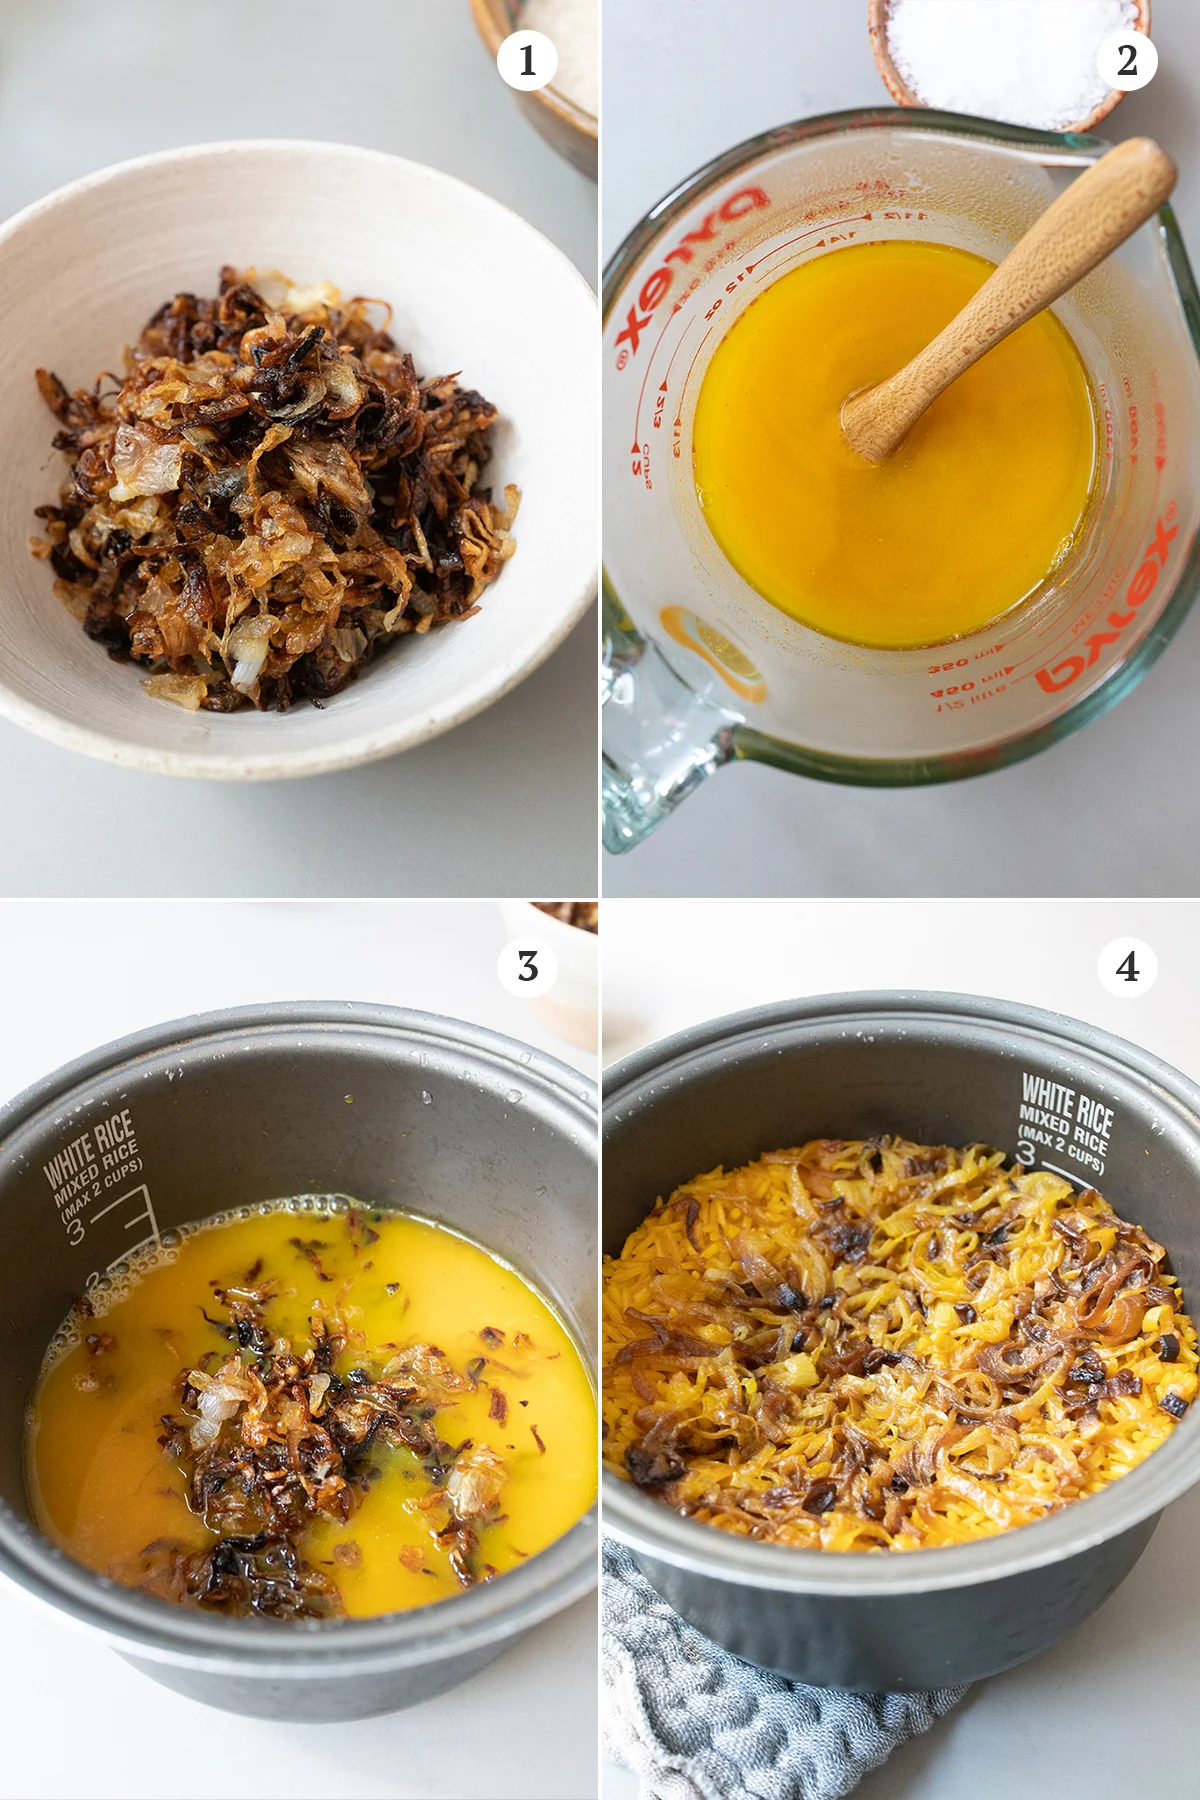 Collage of making turmeric rice steps. 1) sauté the shallots. 2) mix the chicken broth with turmeric powder and salt. 3) layer everything into the rice cooker. 4) cook the rice in the rice cooker and then fluff and mix.